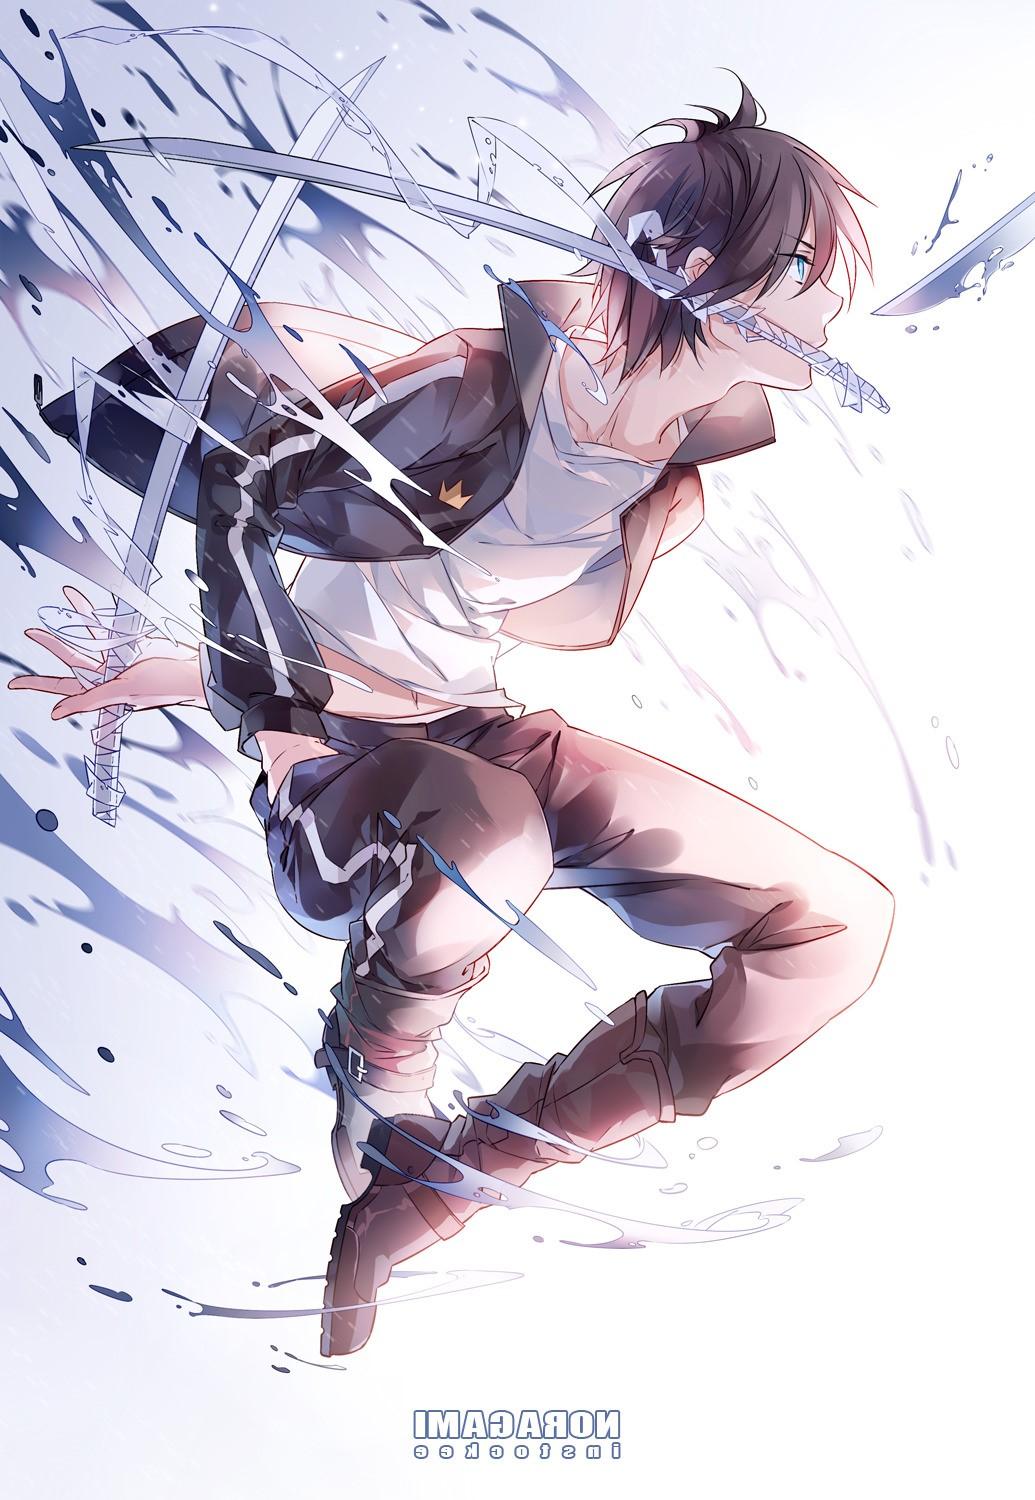 Download A Dark Anime Boy Madly Holding a Sword Wallpaper